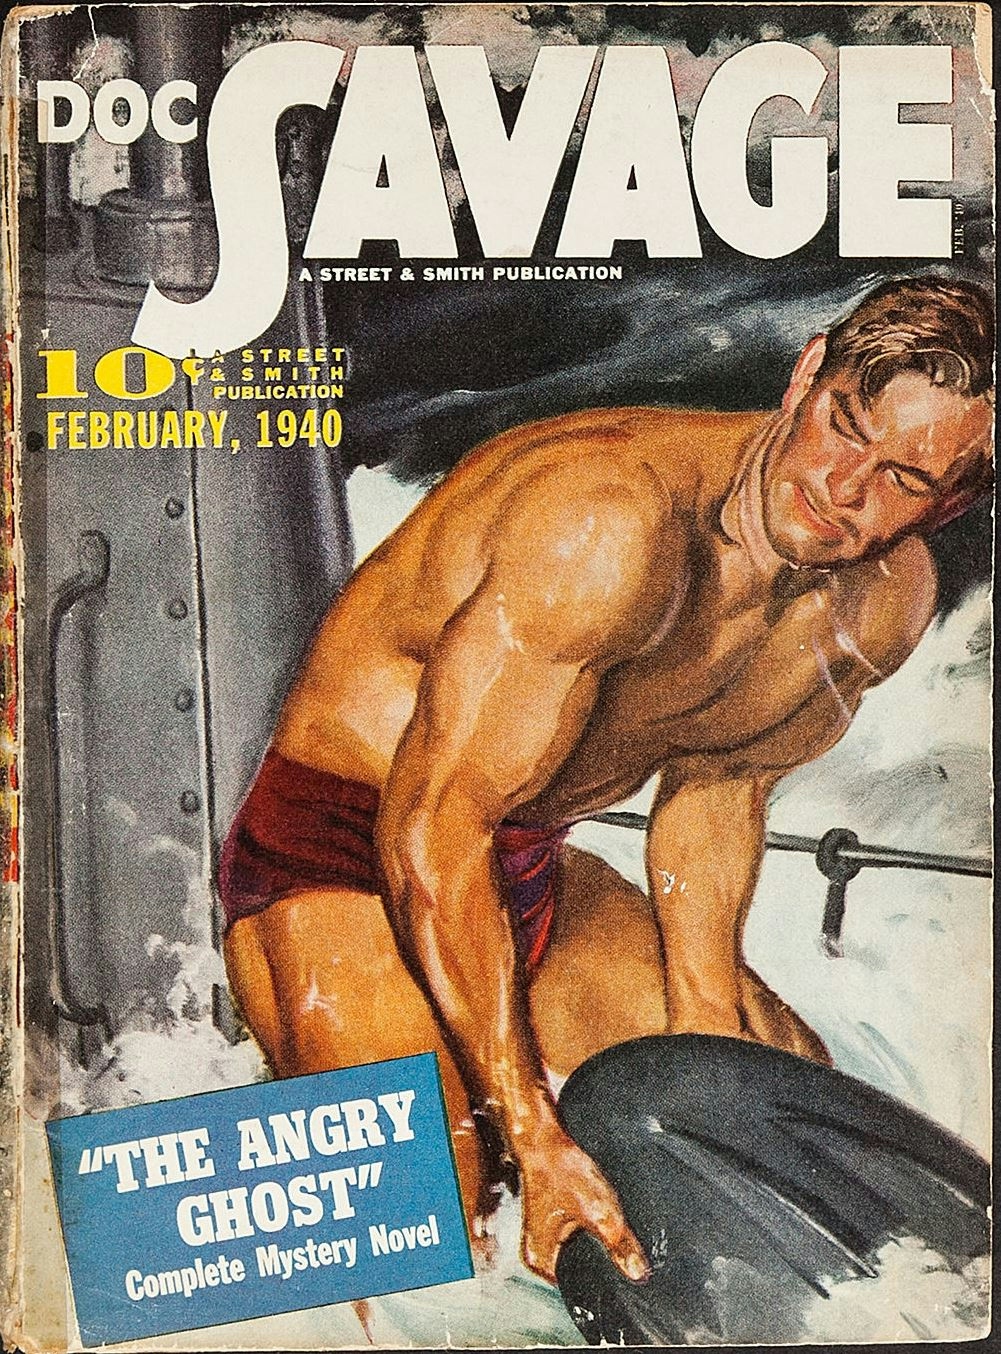 Image of cover of Doc Savage magazine with topless man on a boat in the foreground and white text in the background